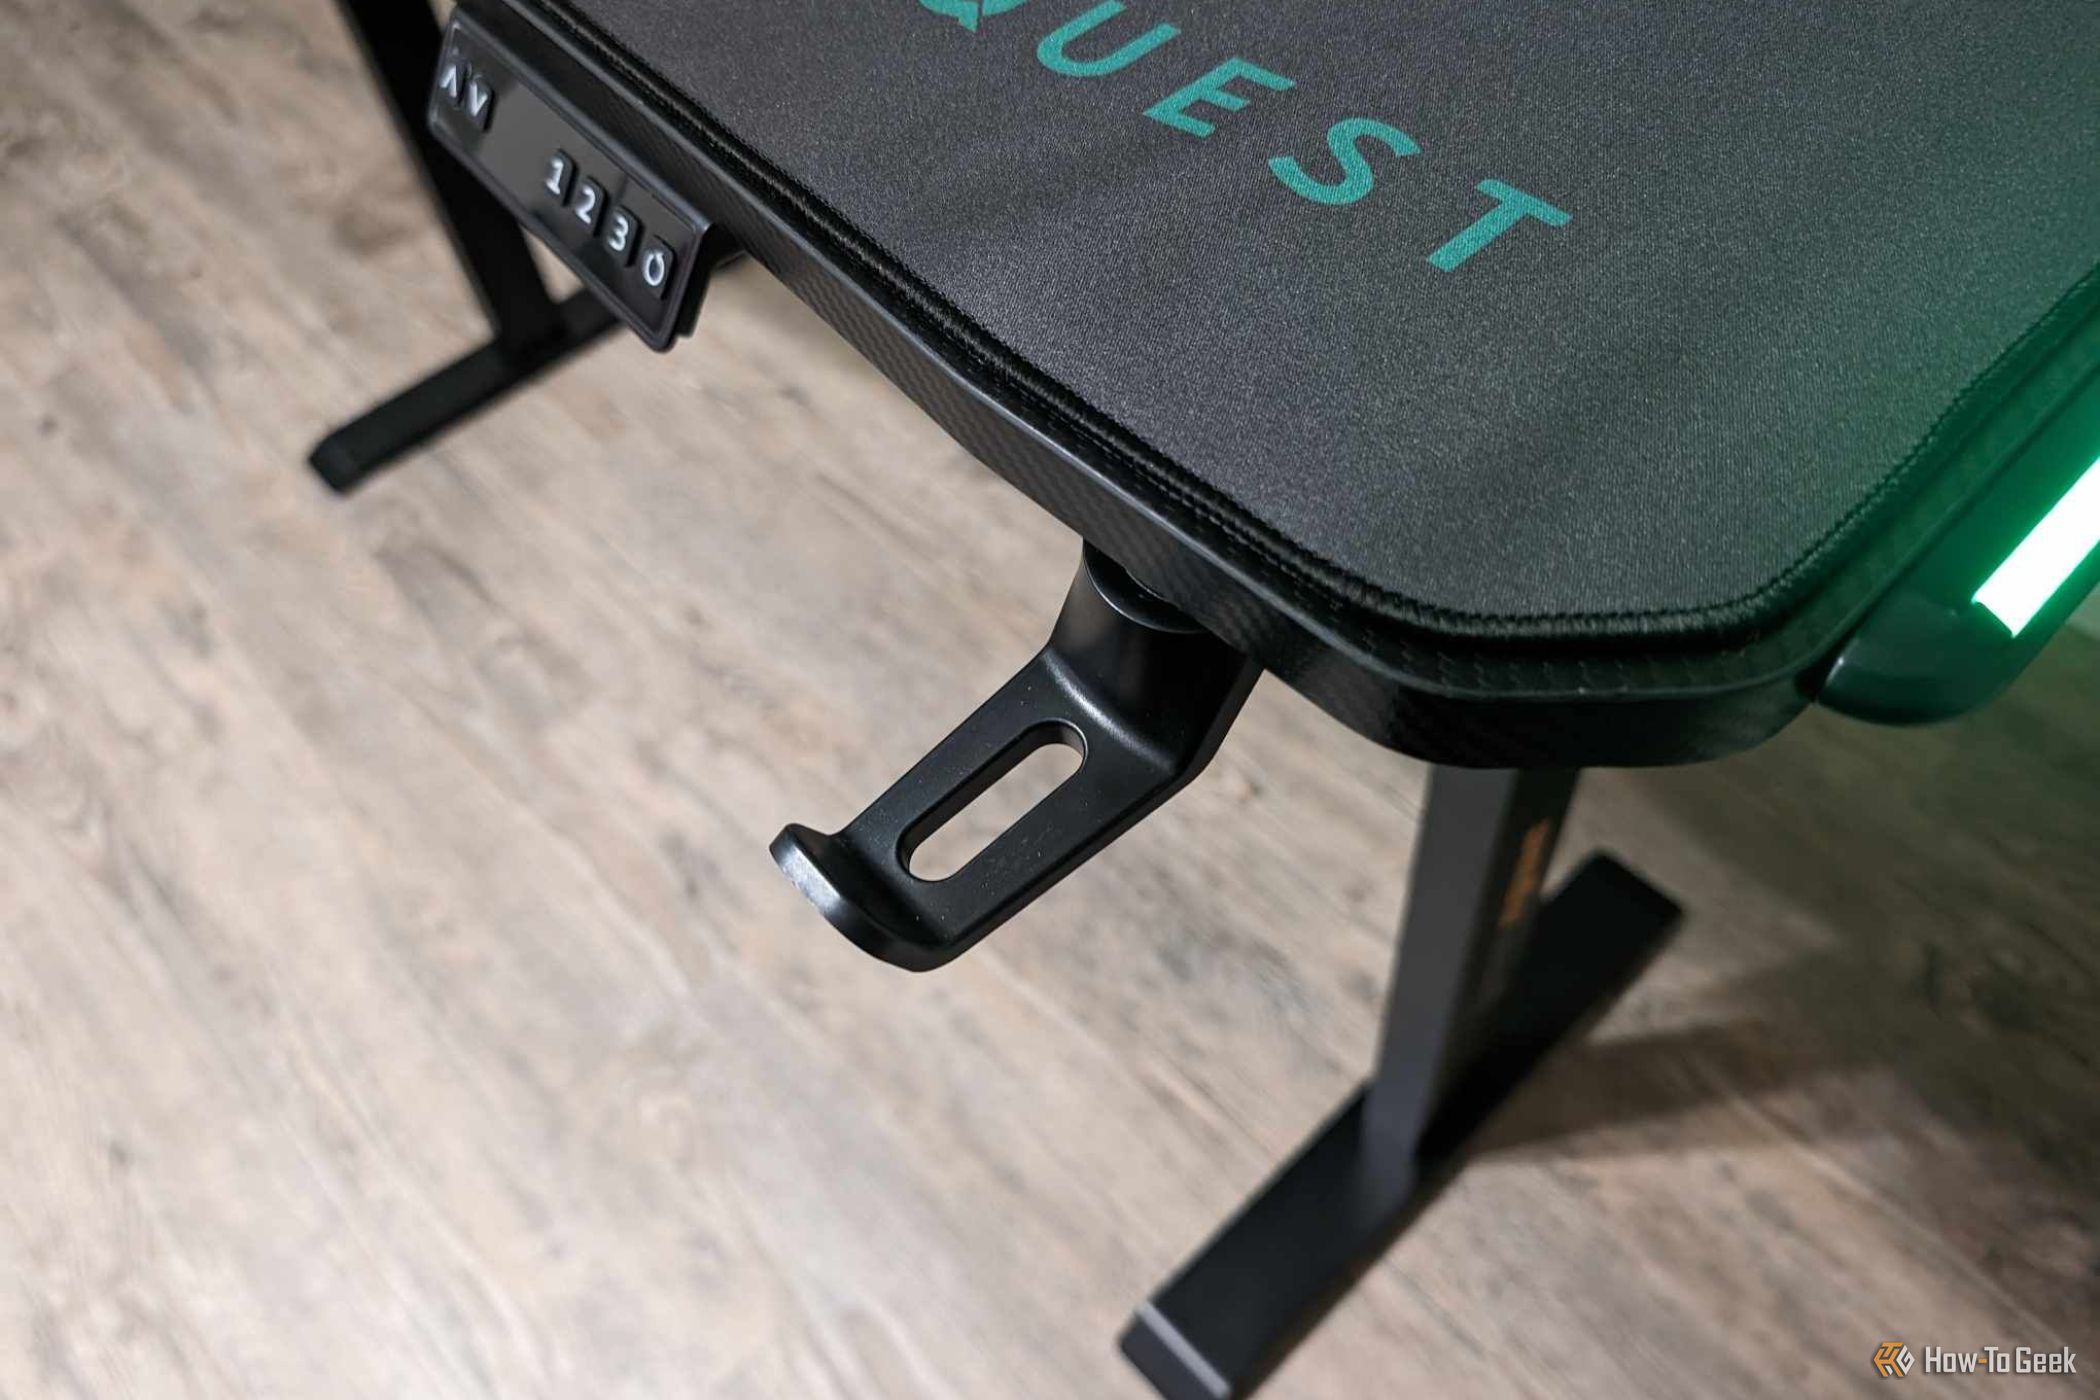 AndaSeat FlyQuest Edition Gaming Standing Desk Headset Hook installed